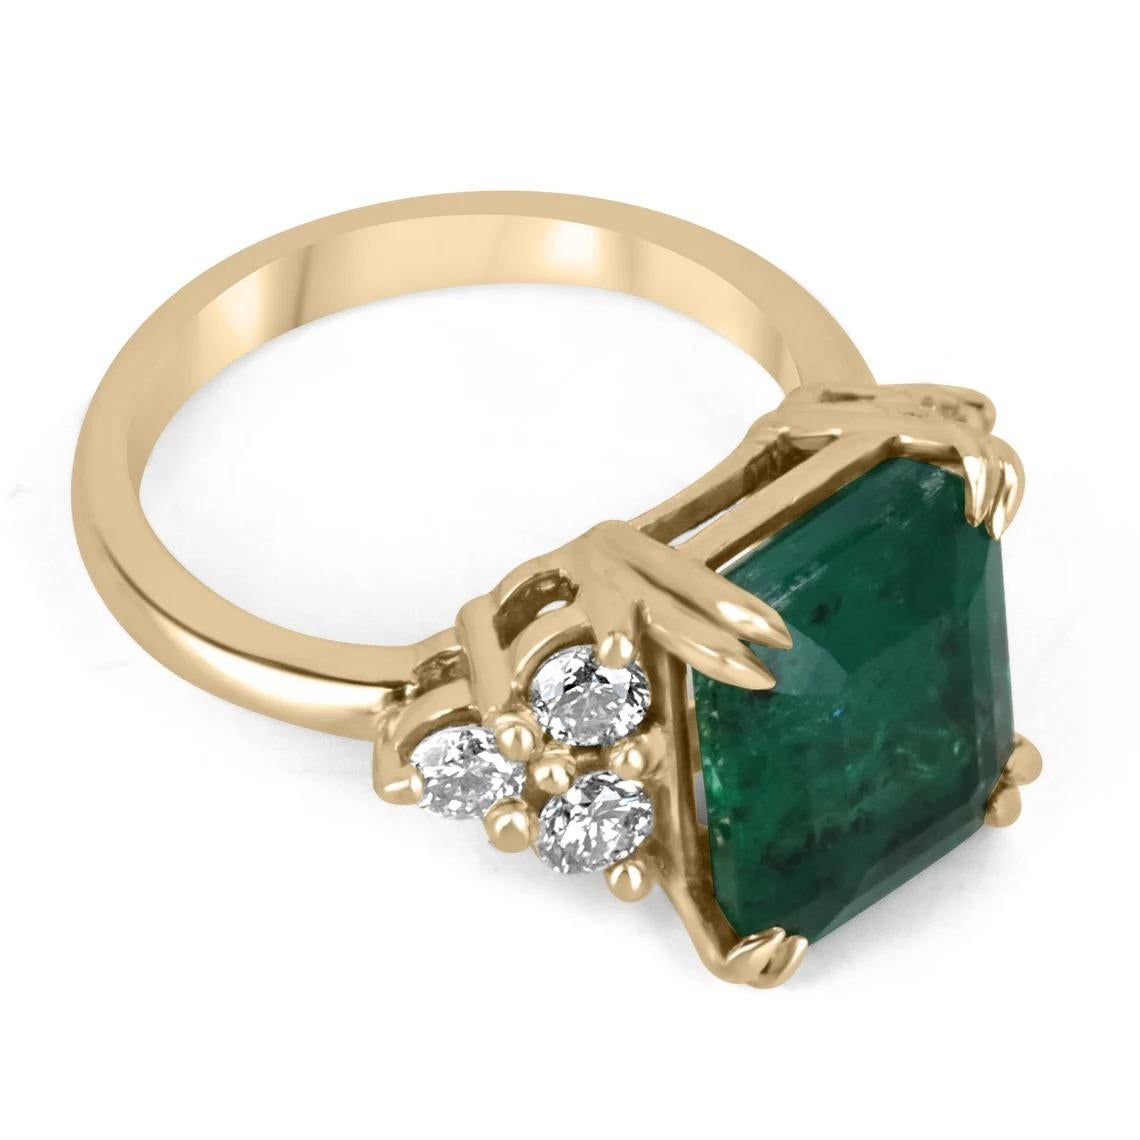 An iconic emerald and diamond engagement, right hand, or statement ring. The center stone features a large 4.52-carat emerald cut, emerald with stunning qualities; a deep green color, beautiful freckled clarity, and luster. Carefully double